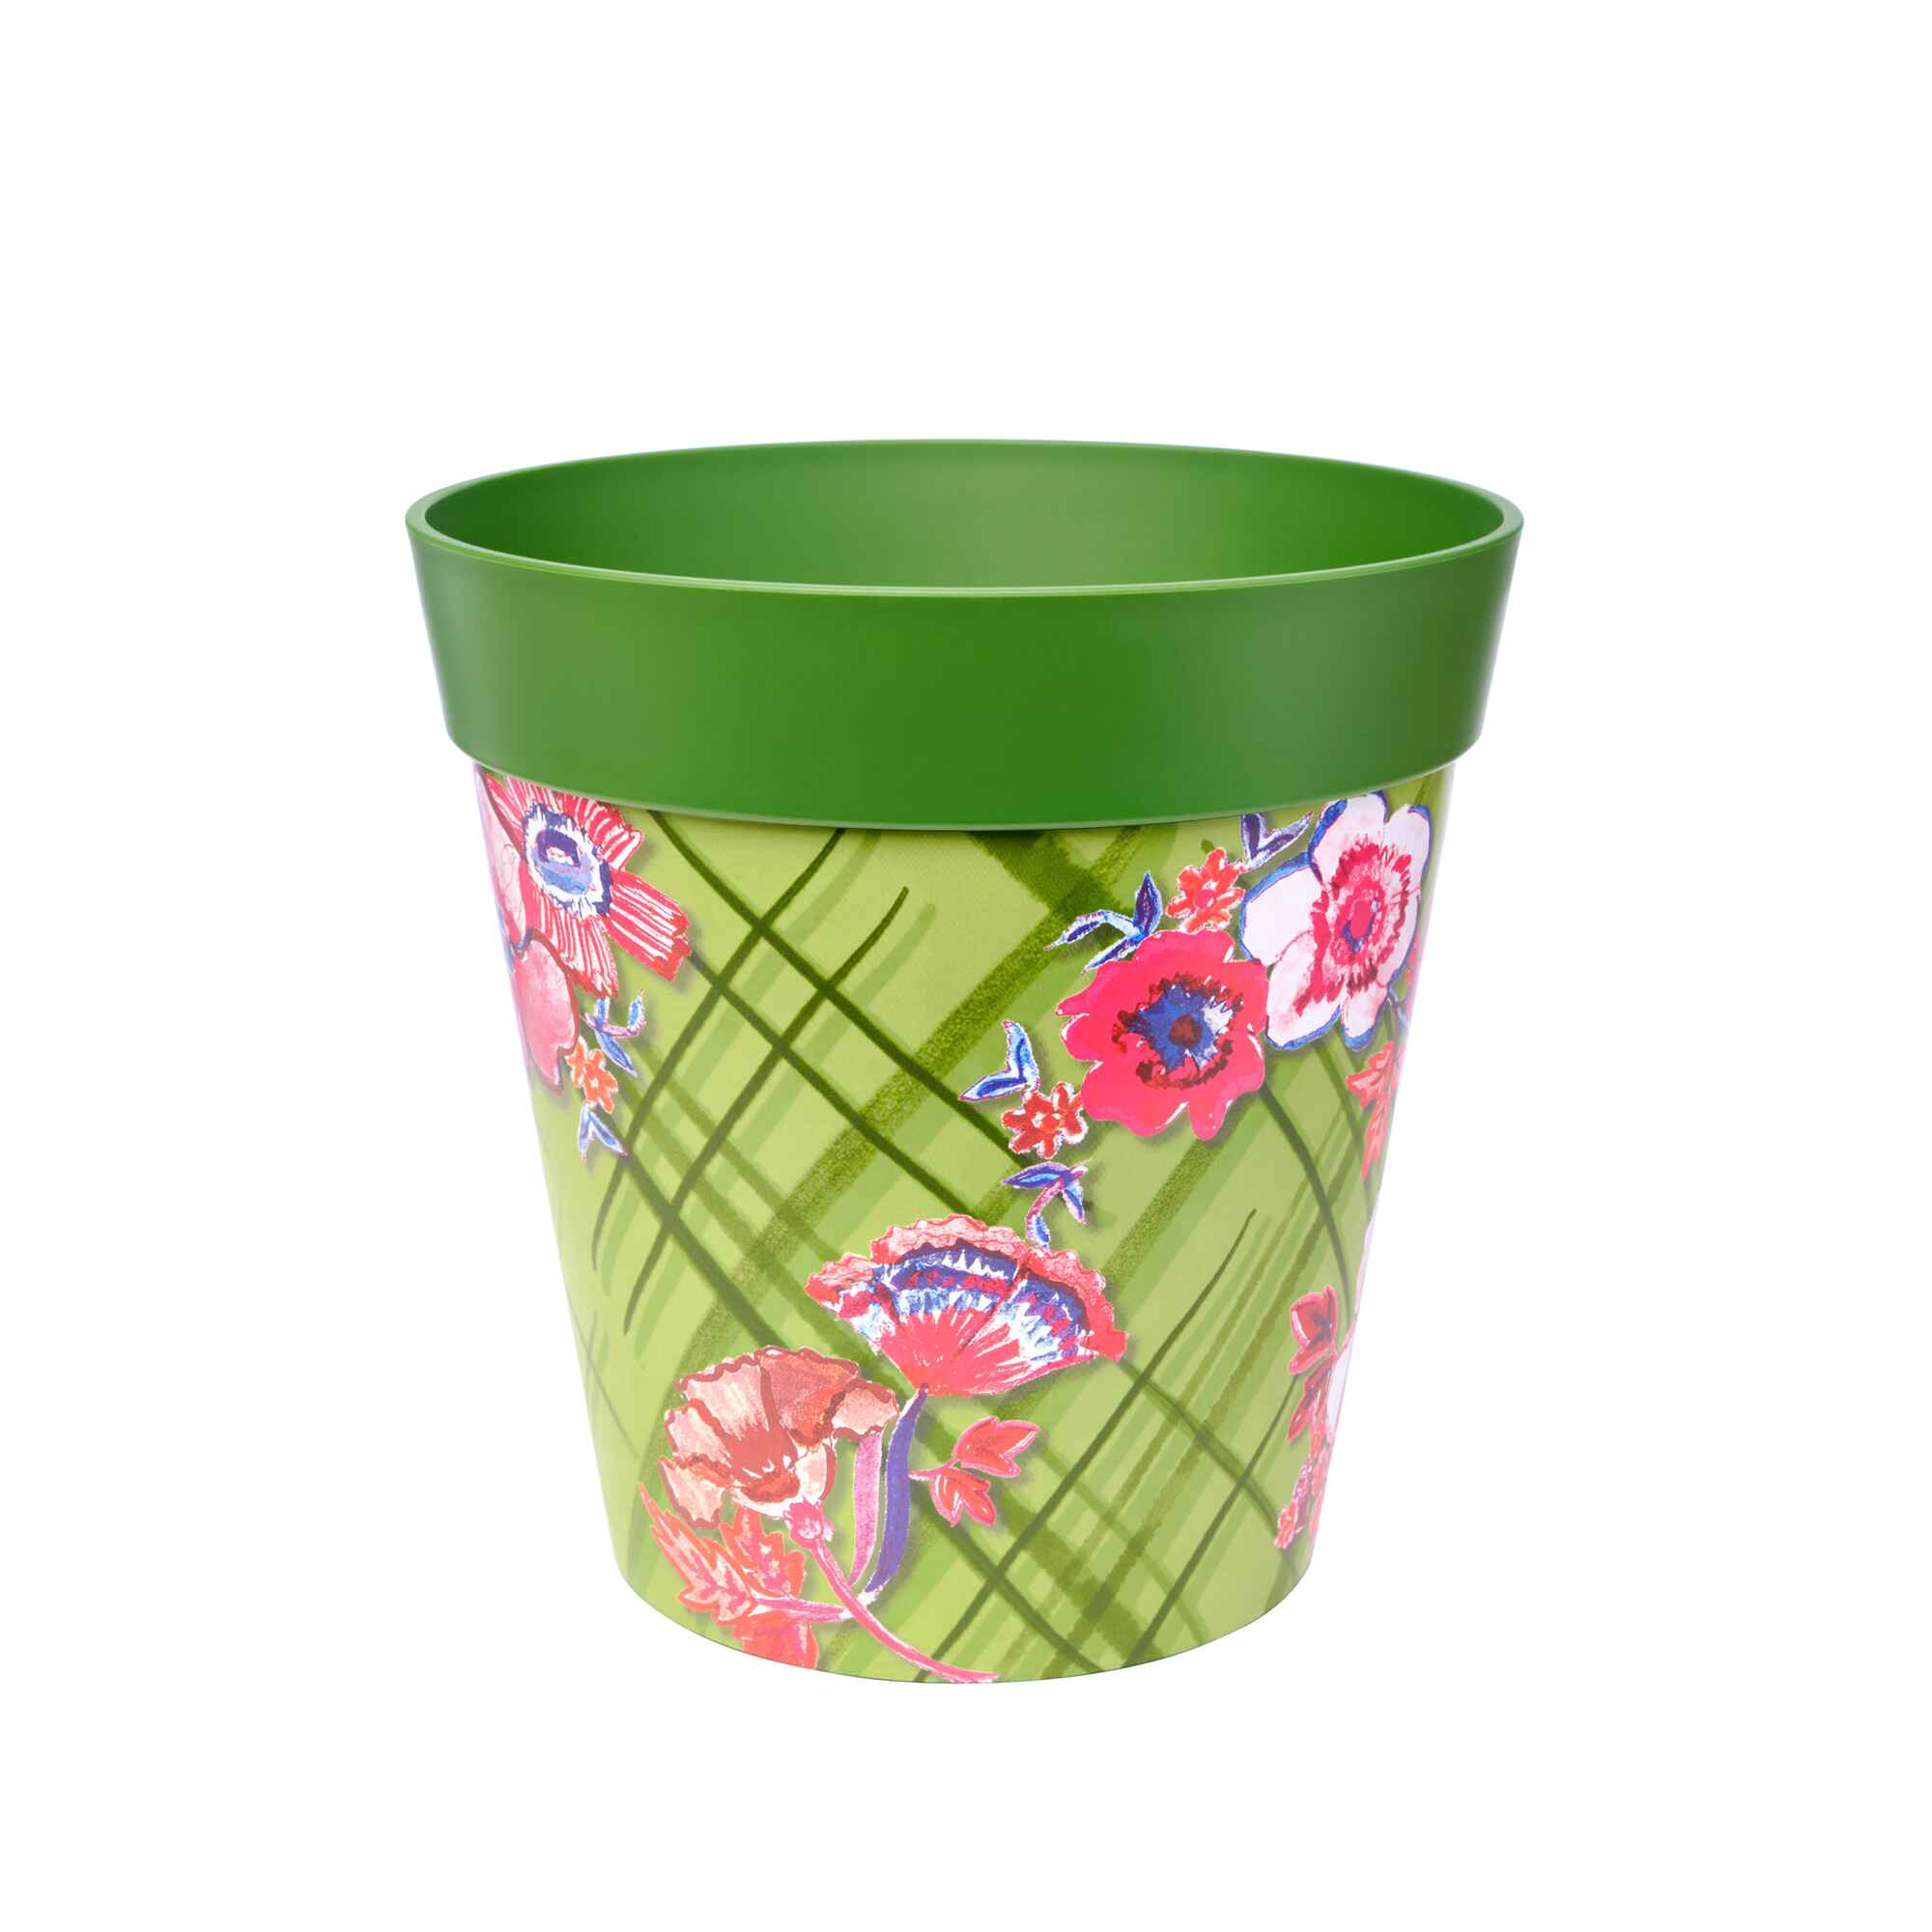 Picture of Large 25cm  Green Trellis and Flowers  Pattern Plastic Indoor/Outdoor Flowerpot 